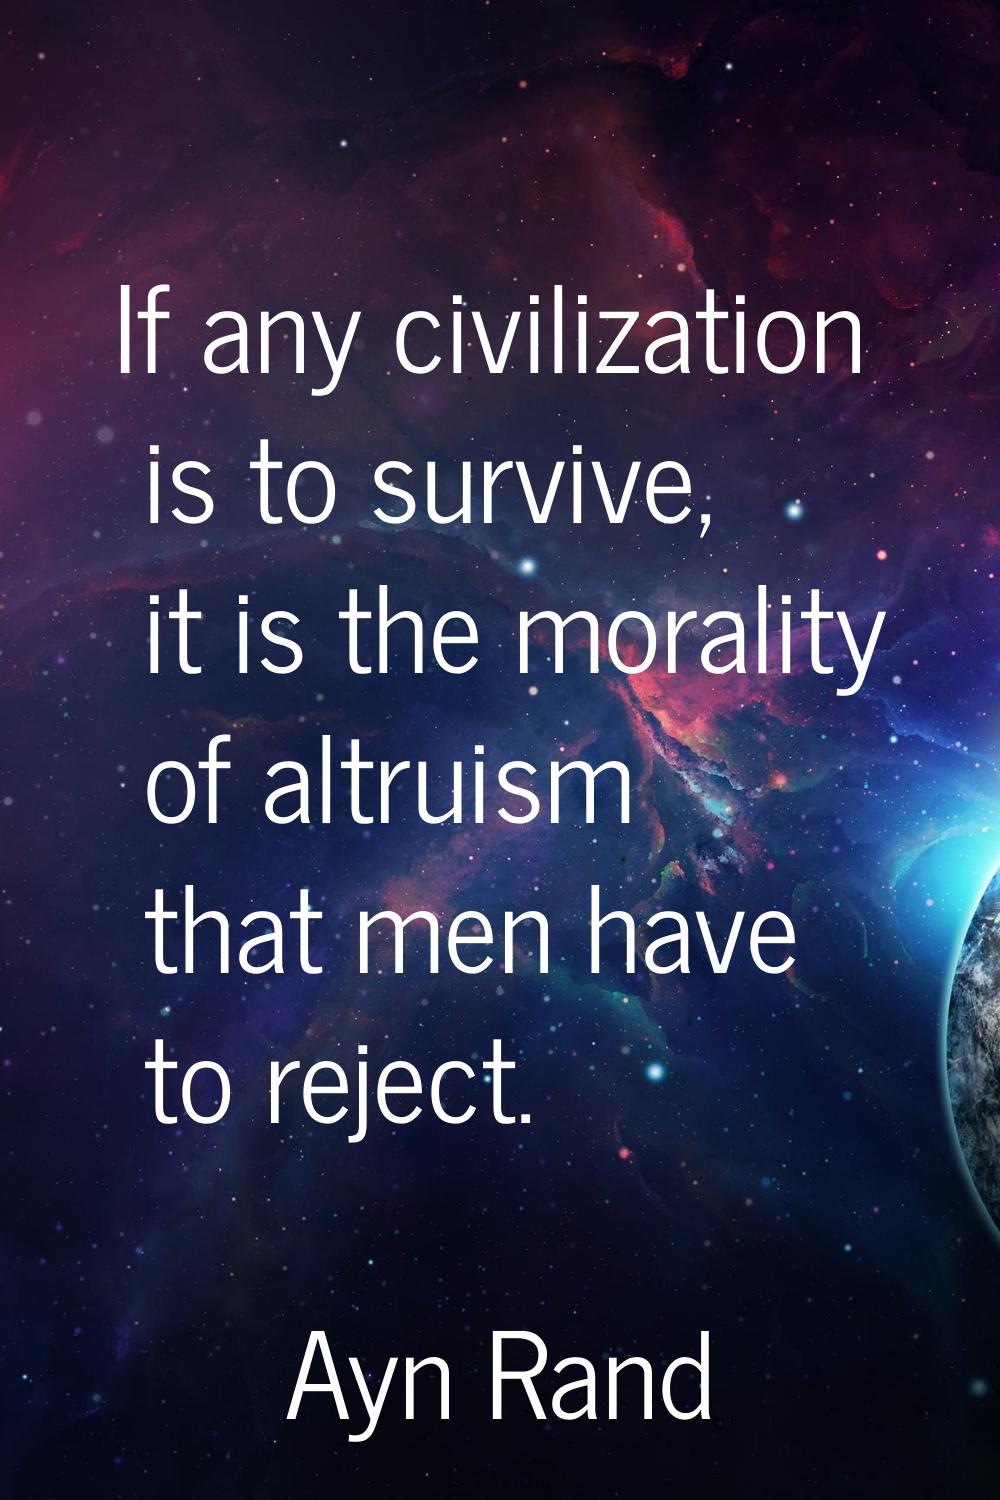 If any civilization is to survive, it is the morality of altruism that men have to reject.